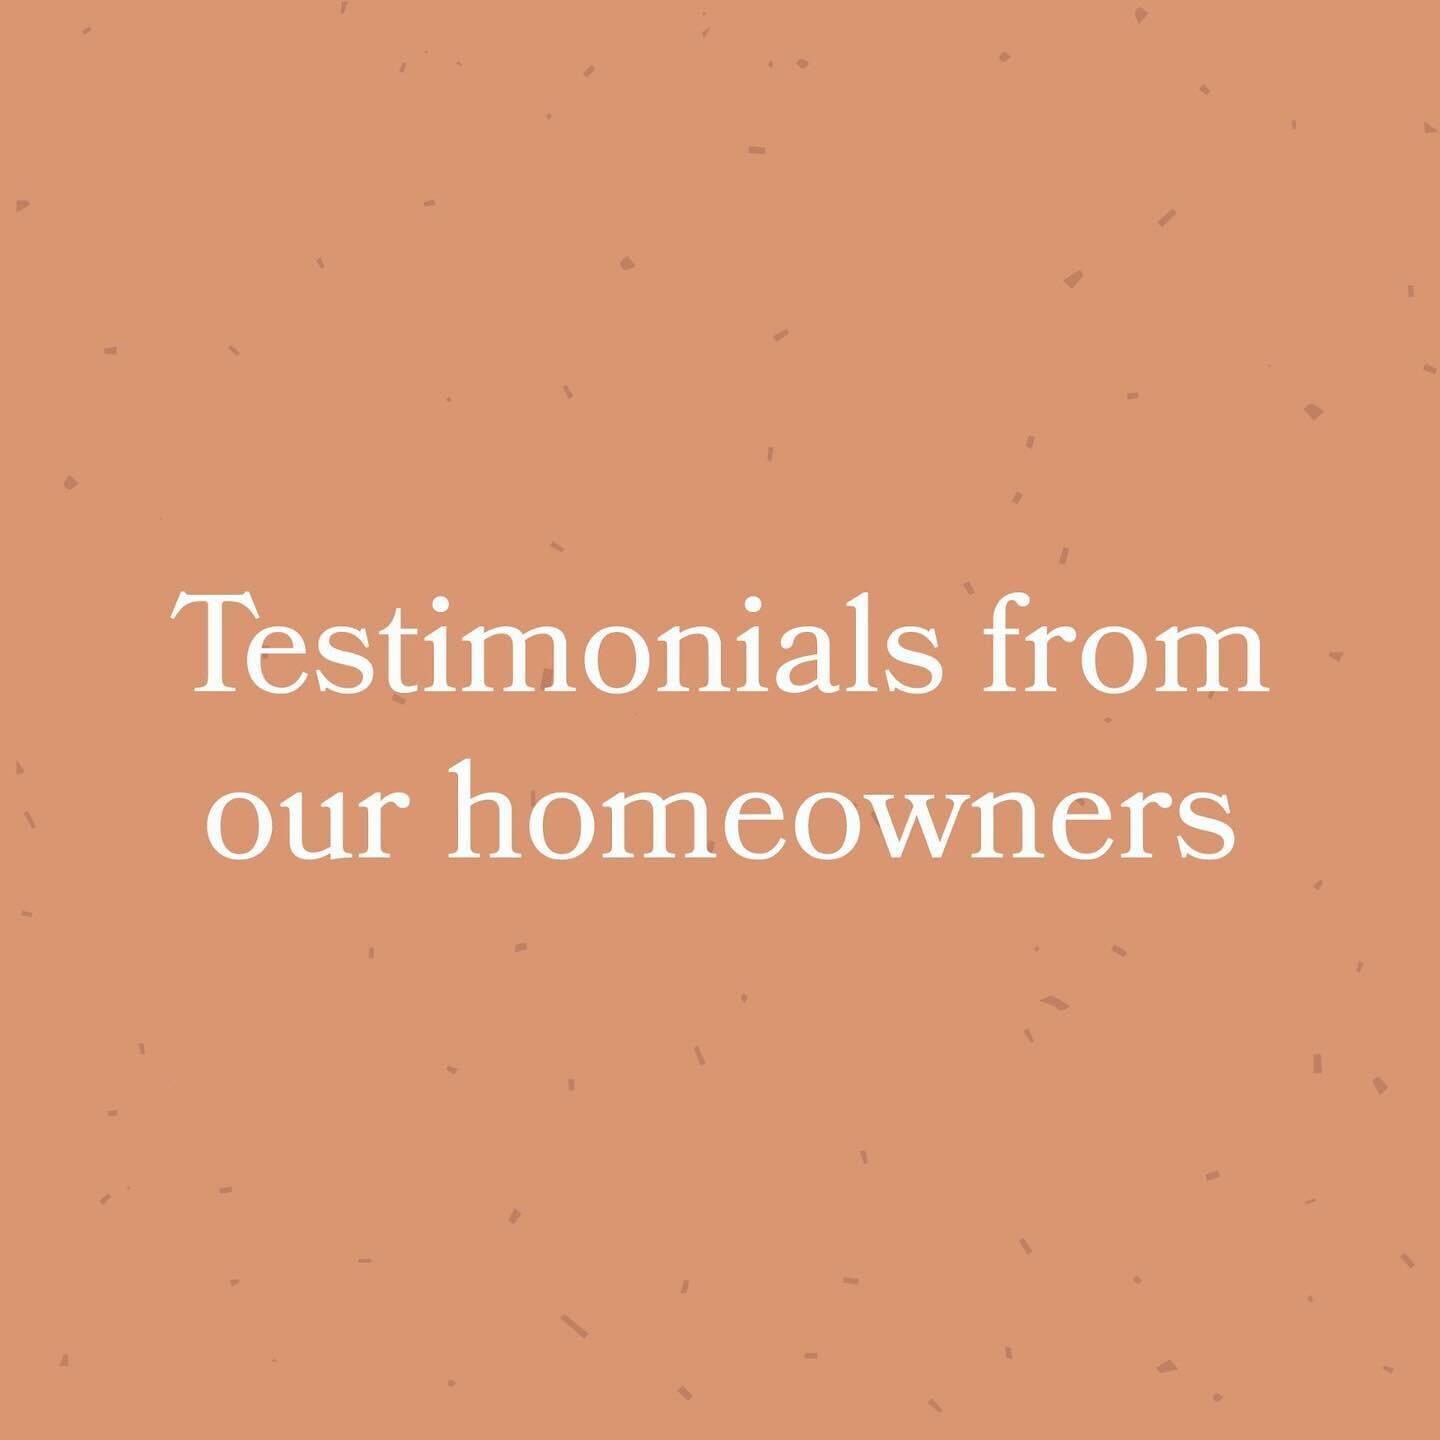 Our homeowner testimonials show the importance of affordable housing - how much security and joy it brings to families 🏡

#&Oacute;Cualann
#AffordableHousing
#Testimonial